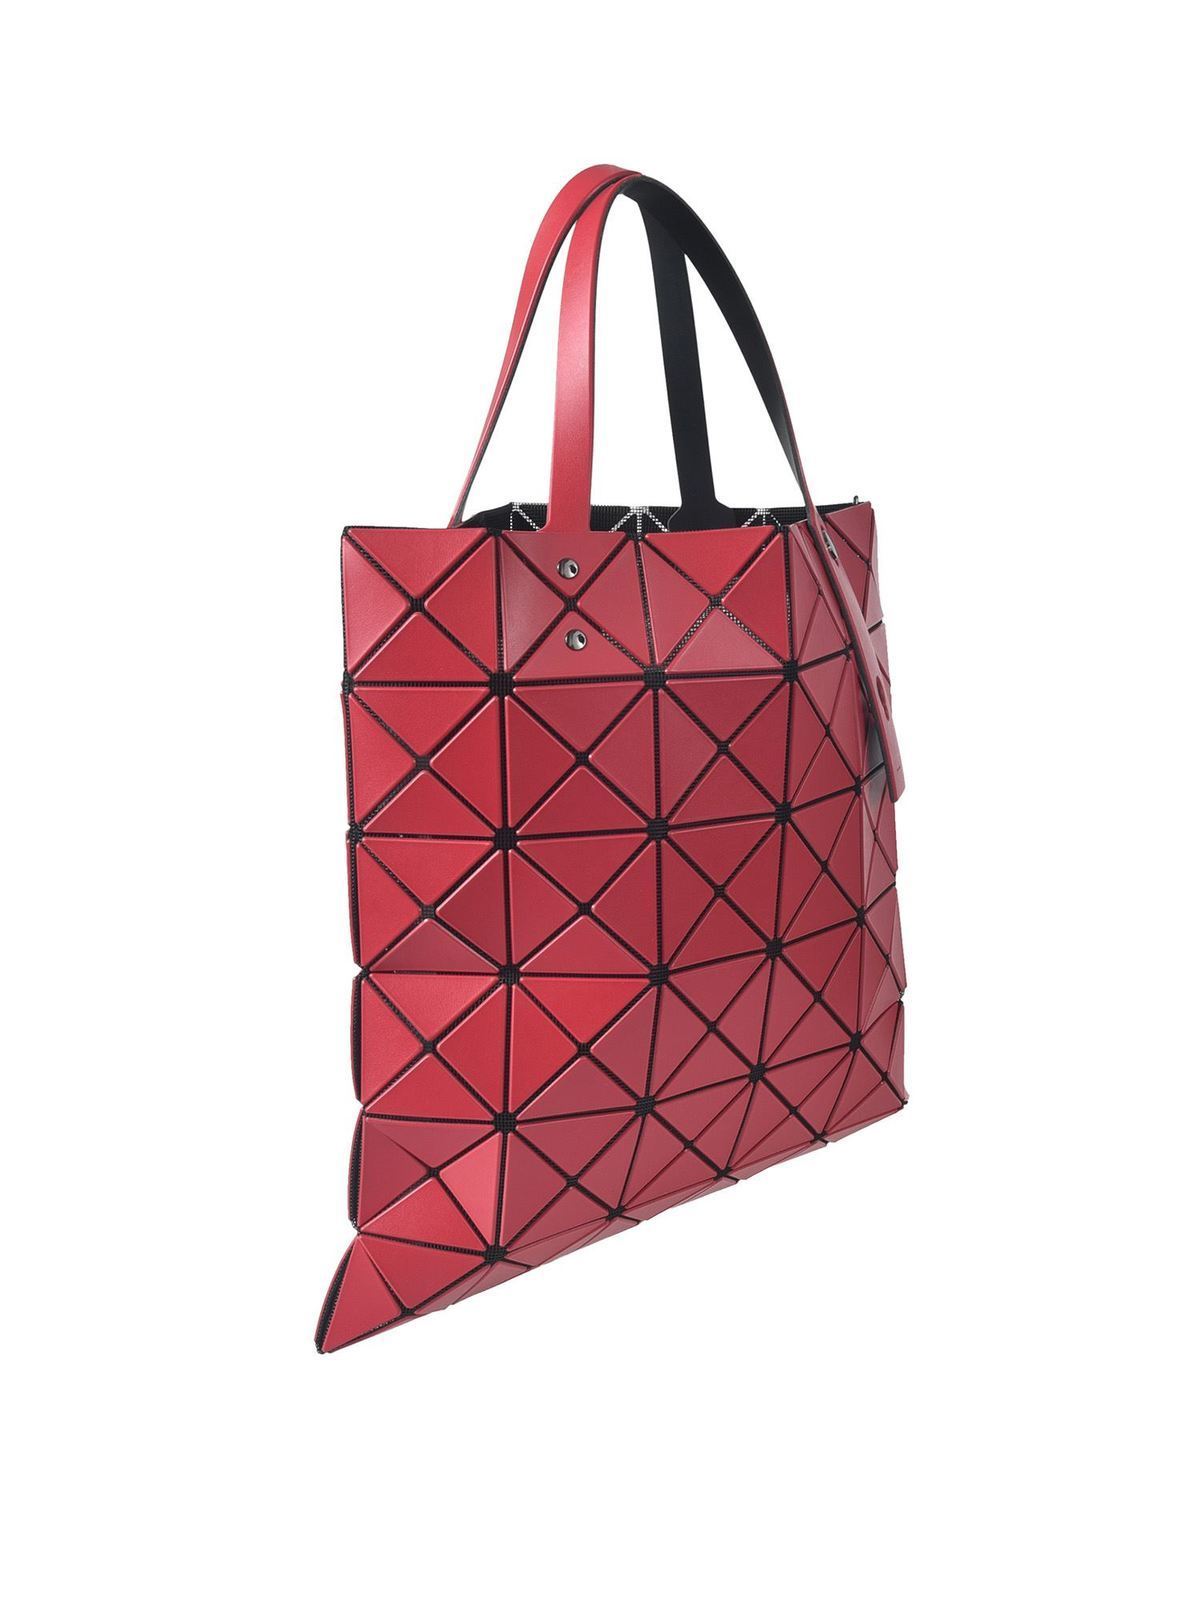 Totes bags Bao Bao Issey Miyake - Lucent Matte-2 shopper bag in red ...